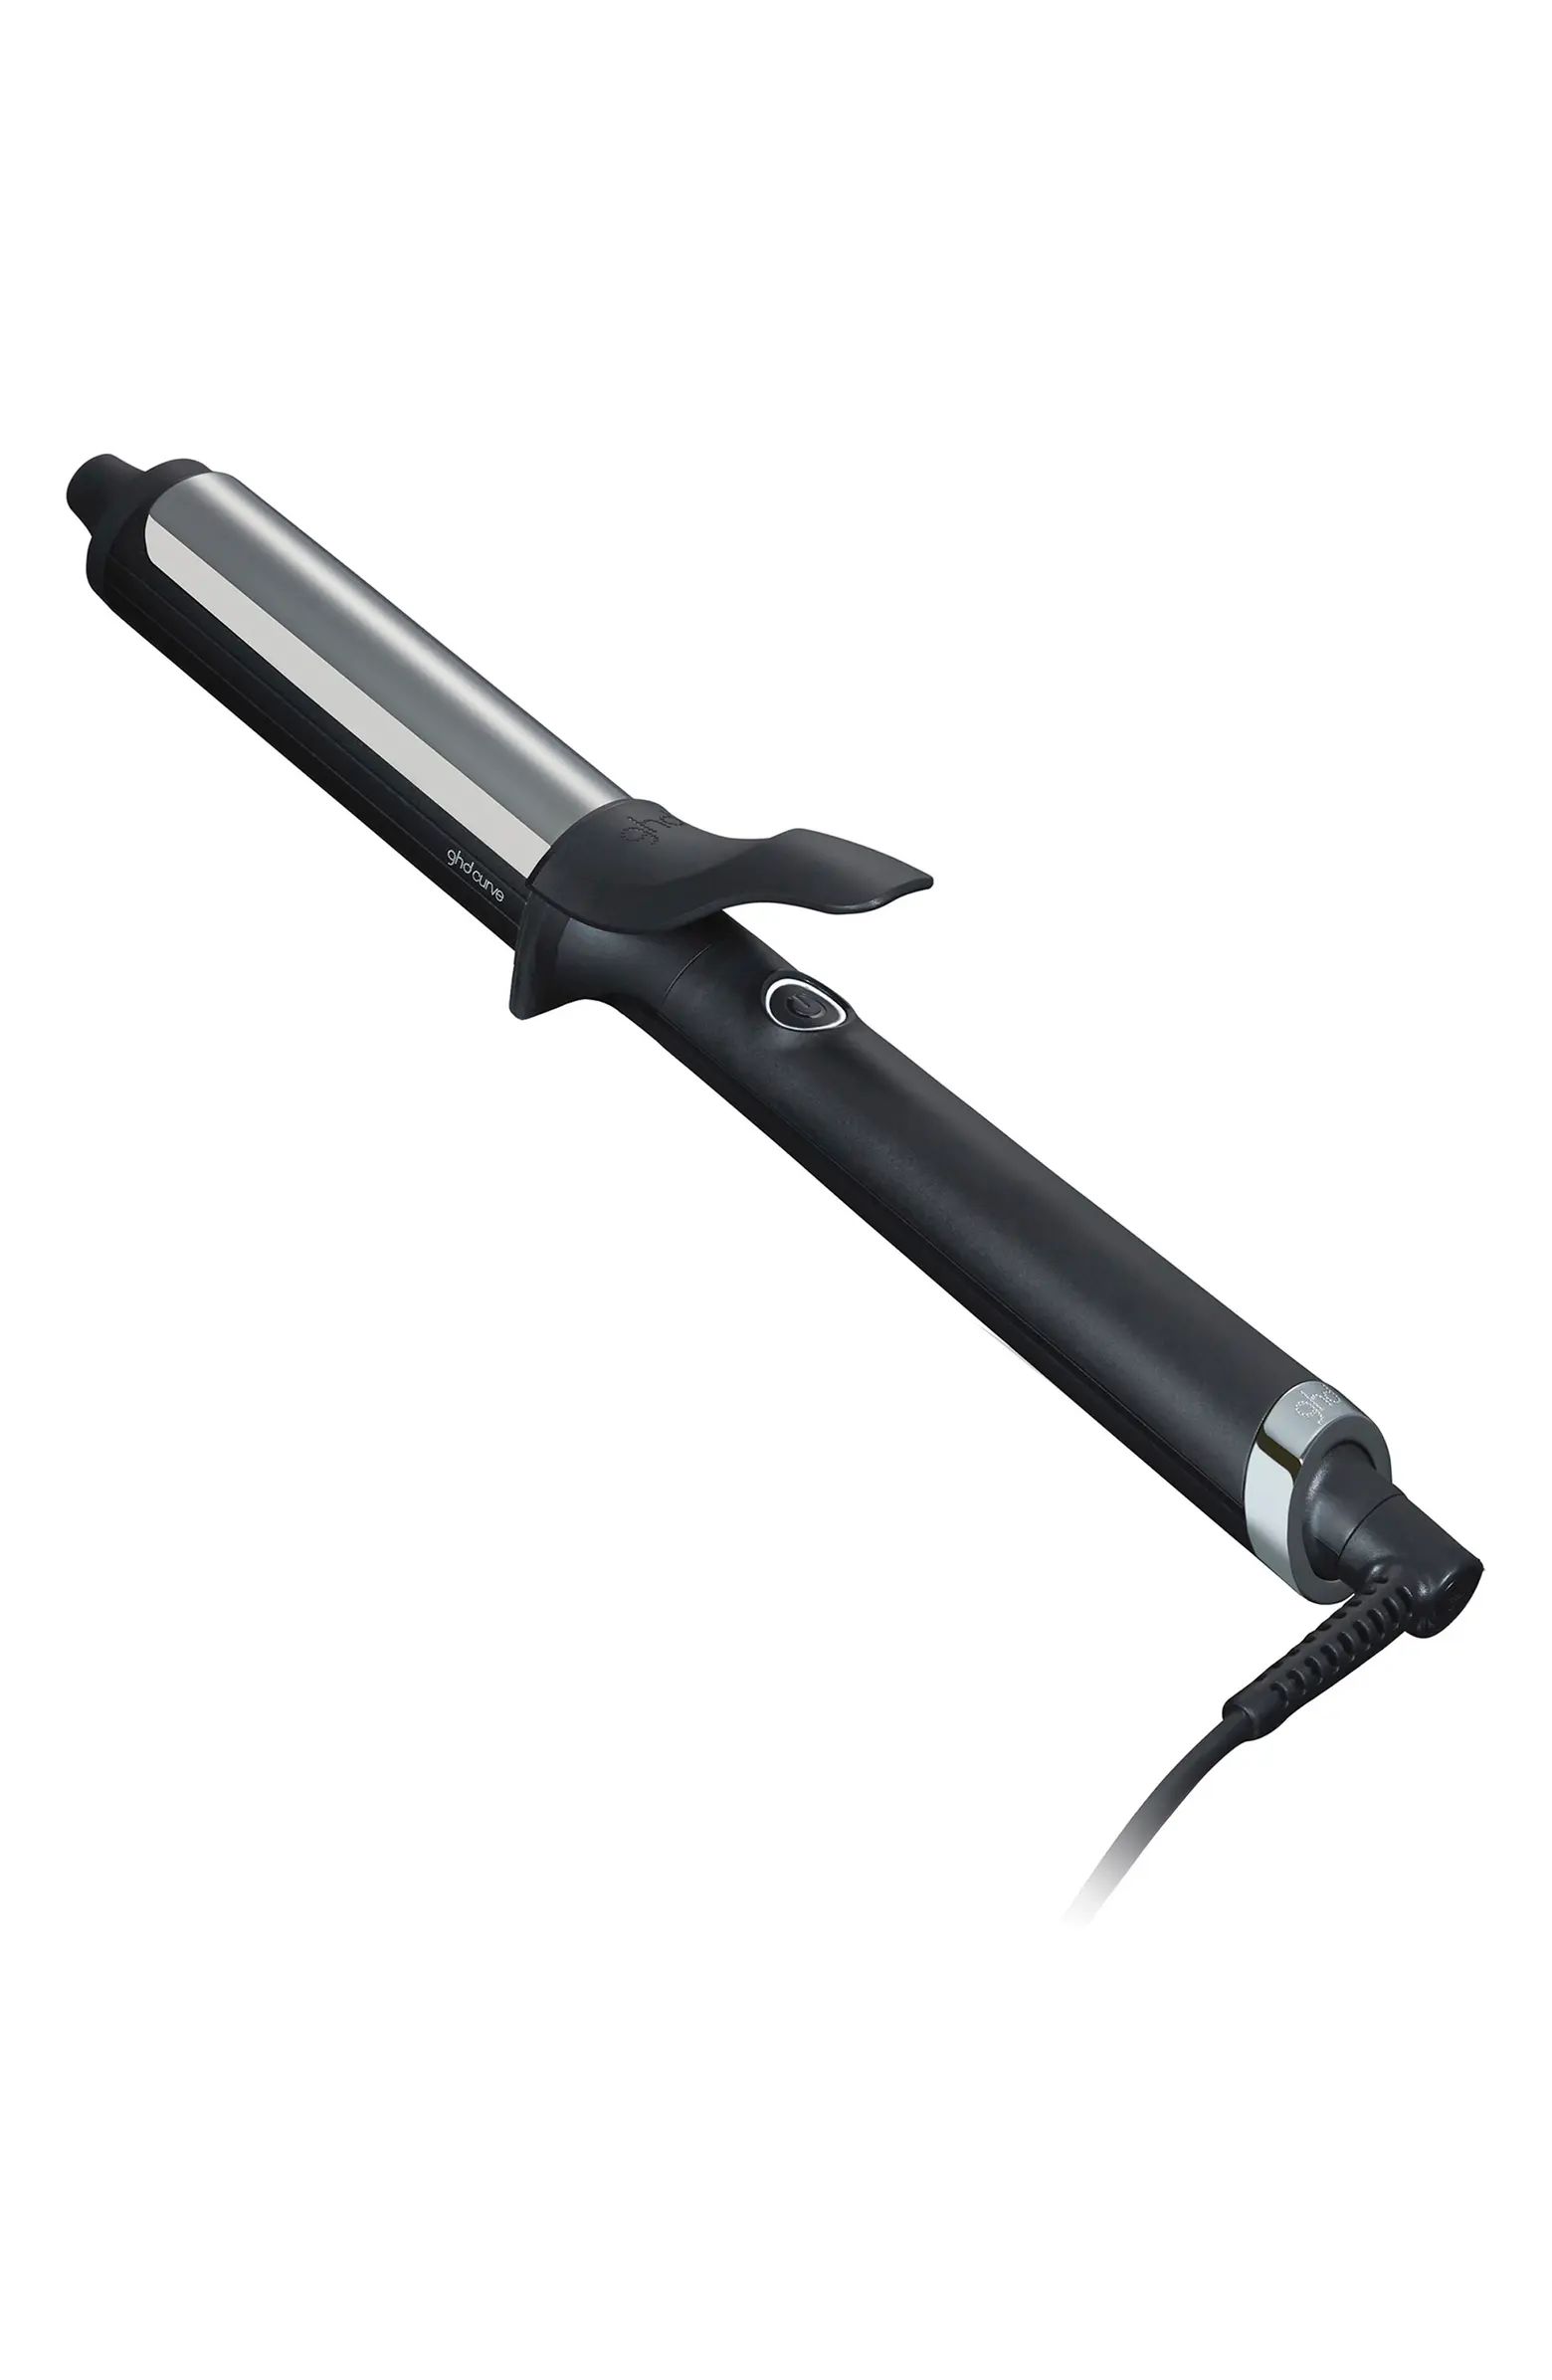 Soft Curl 1 1/4-Inch Curling Iron | Nordstrom